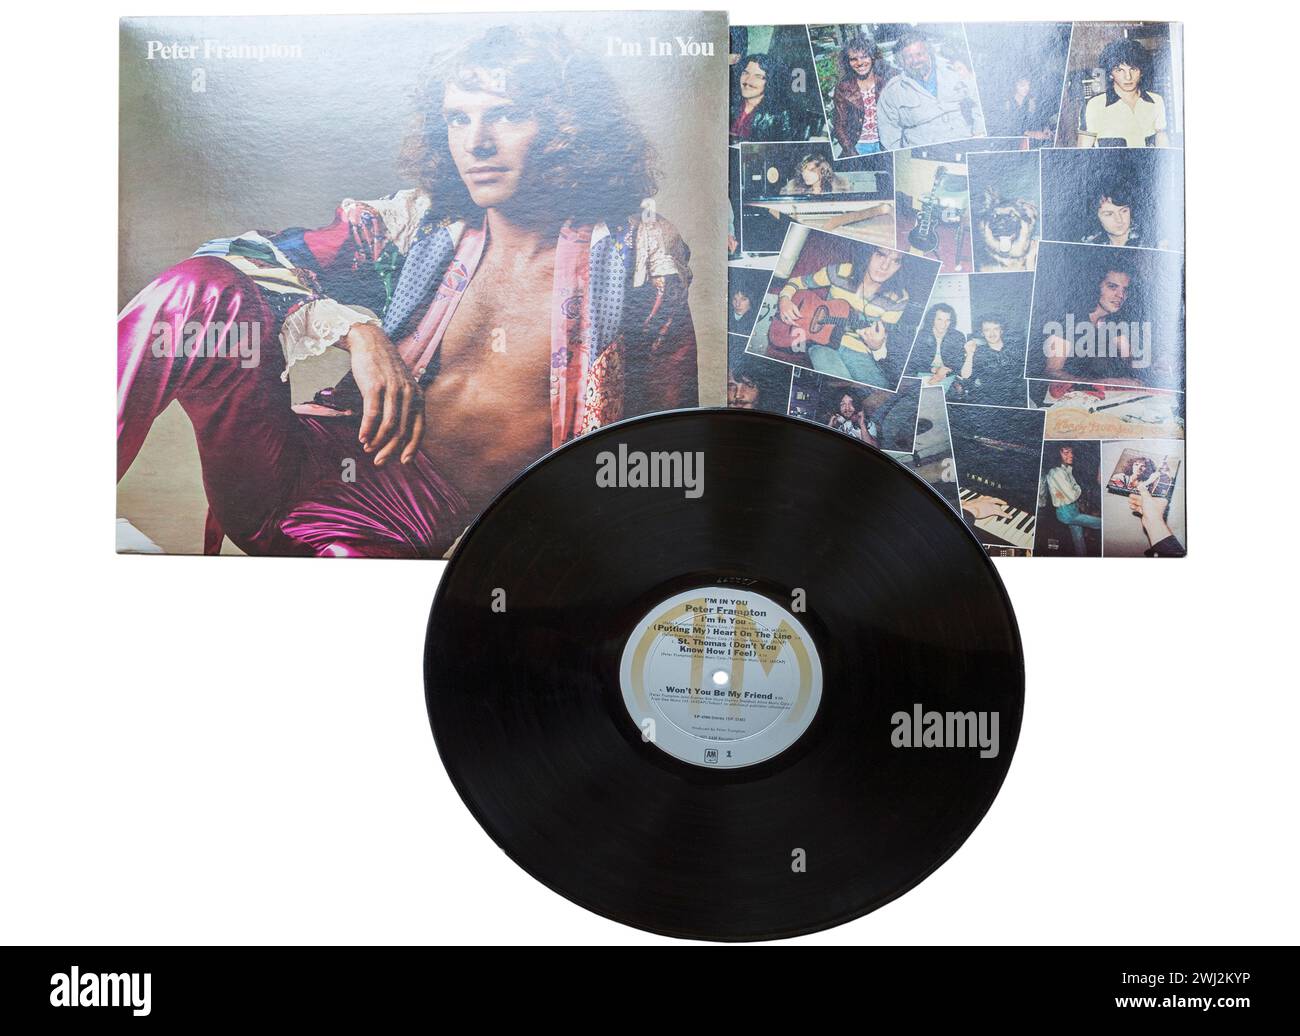 Peter Frampton I'm In You vinyl record album LP cover isolated on white background - 1977 Stock Photo